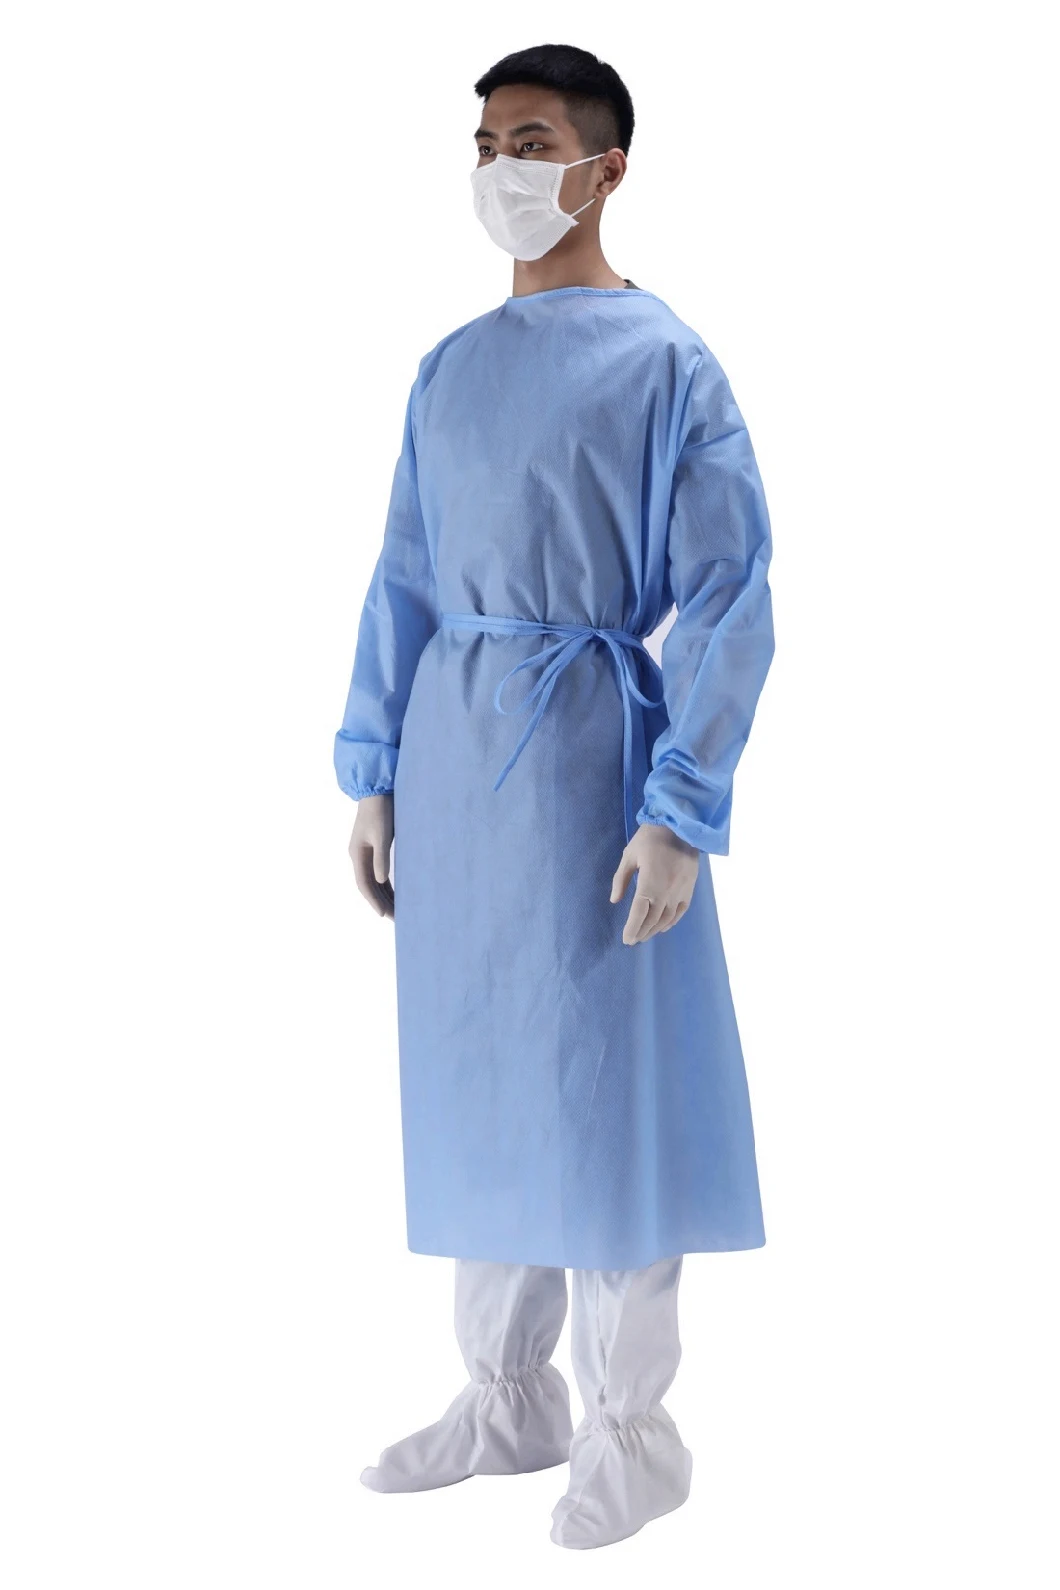 Disposable Non-Woven Surgical Gown, Disposable Sterile Nonwoven Surgical Gown, Disposable Green AAMI Gown